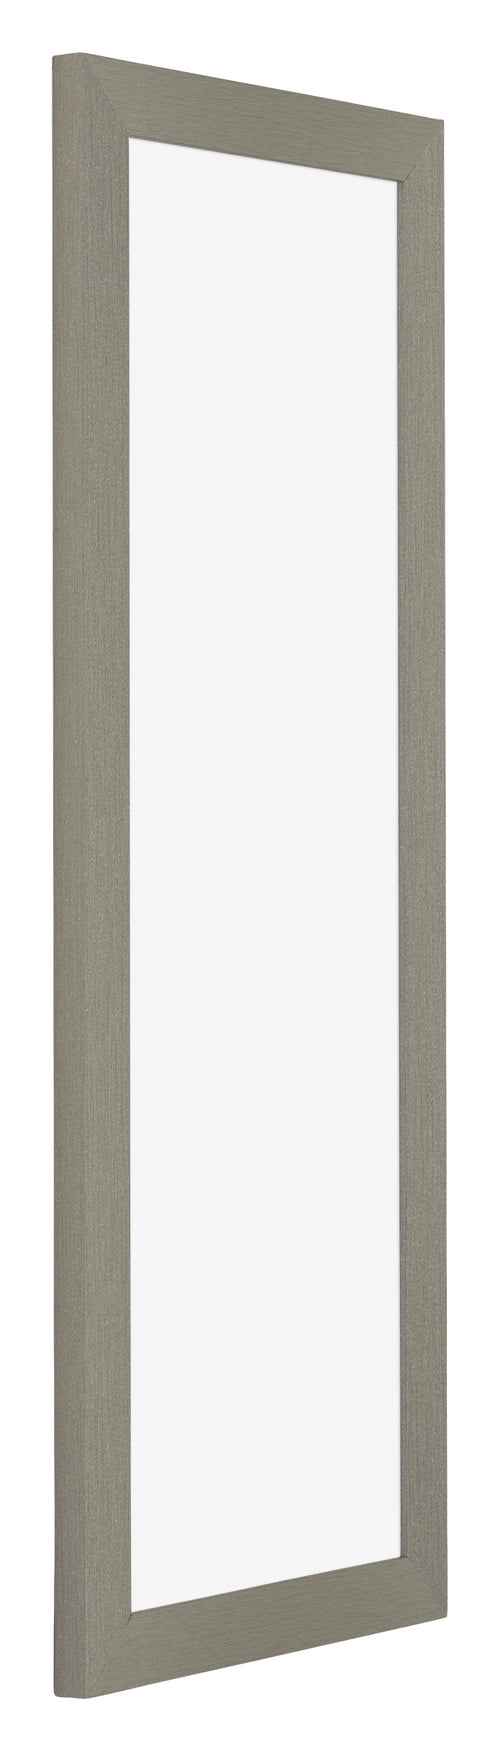 Mura MDF Photo Frame 25x75cm Yellow Front Oblique | Yourdecoration.co.uk